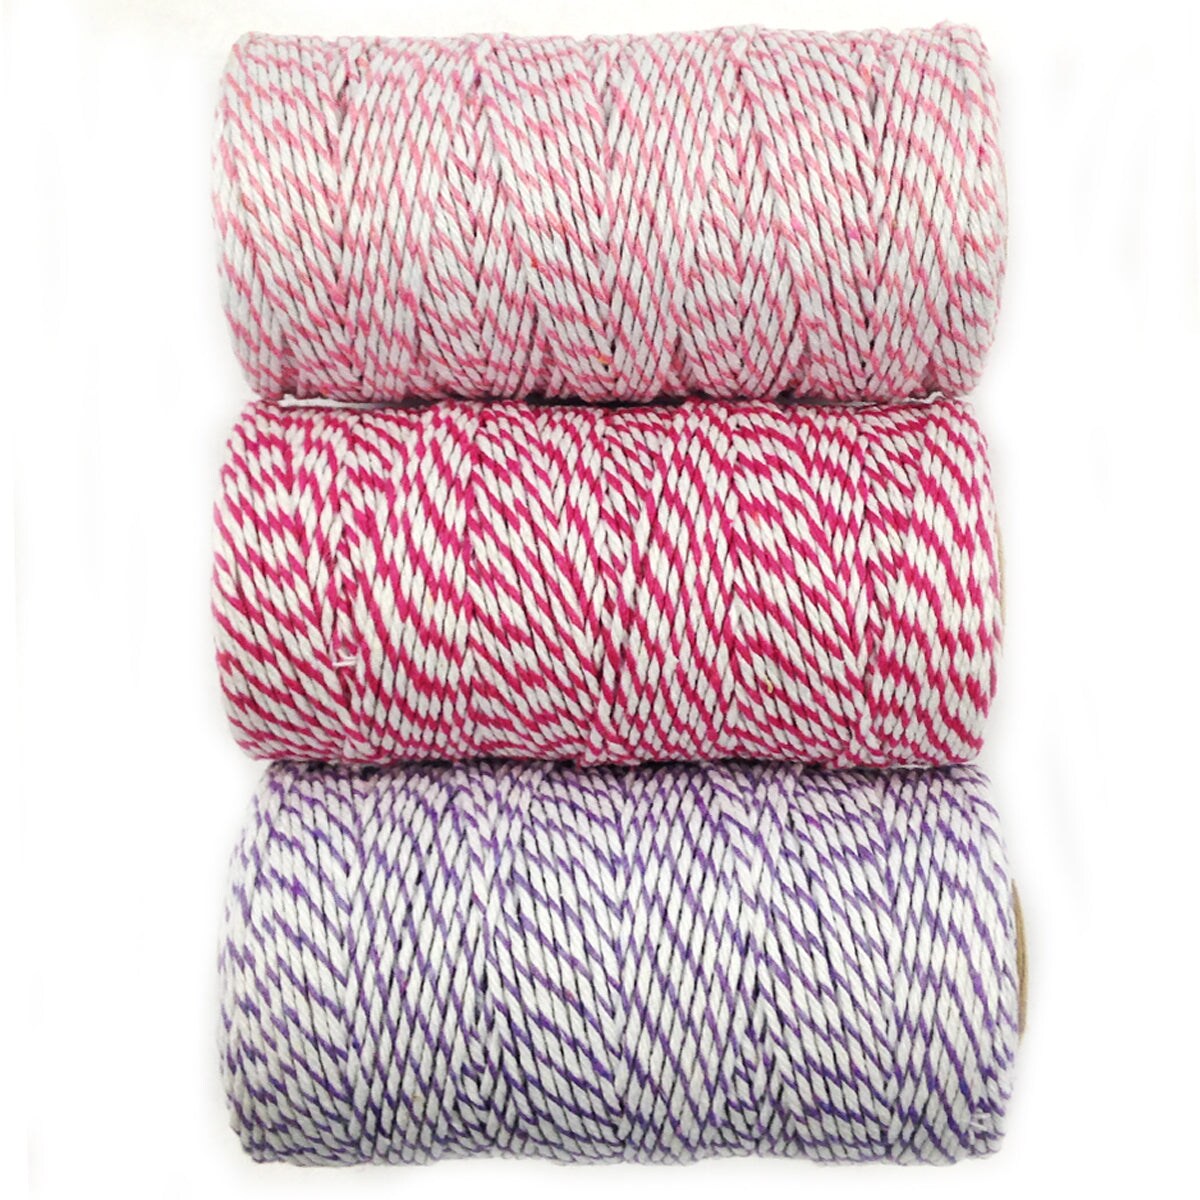 Wrapables Cotton Baker&#x27;s Twine 12ply 330 Yards (Set of 3 Spools x 110 Yards) for Gift Wrapping, Party Decor, and Arts and Crafts (Pink, Hot Pink, Lavender)